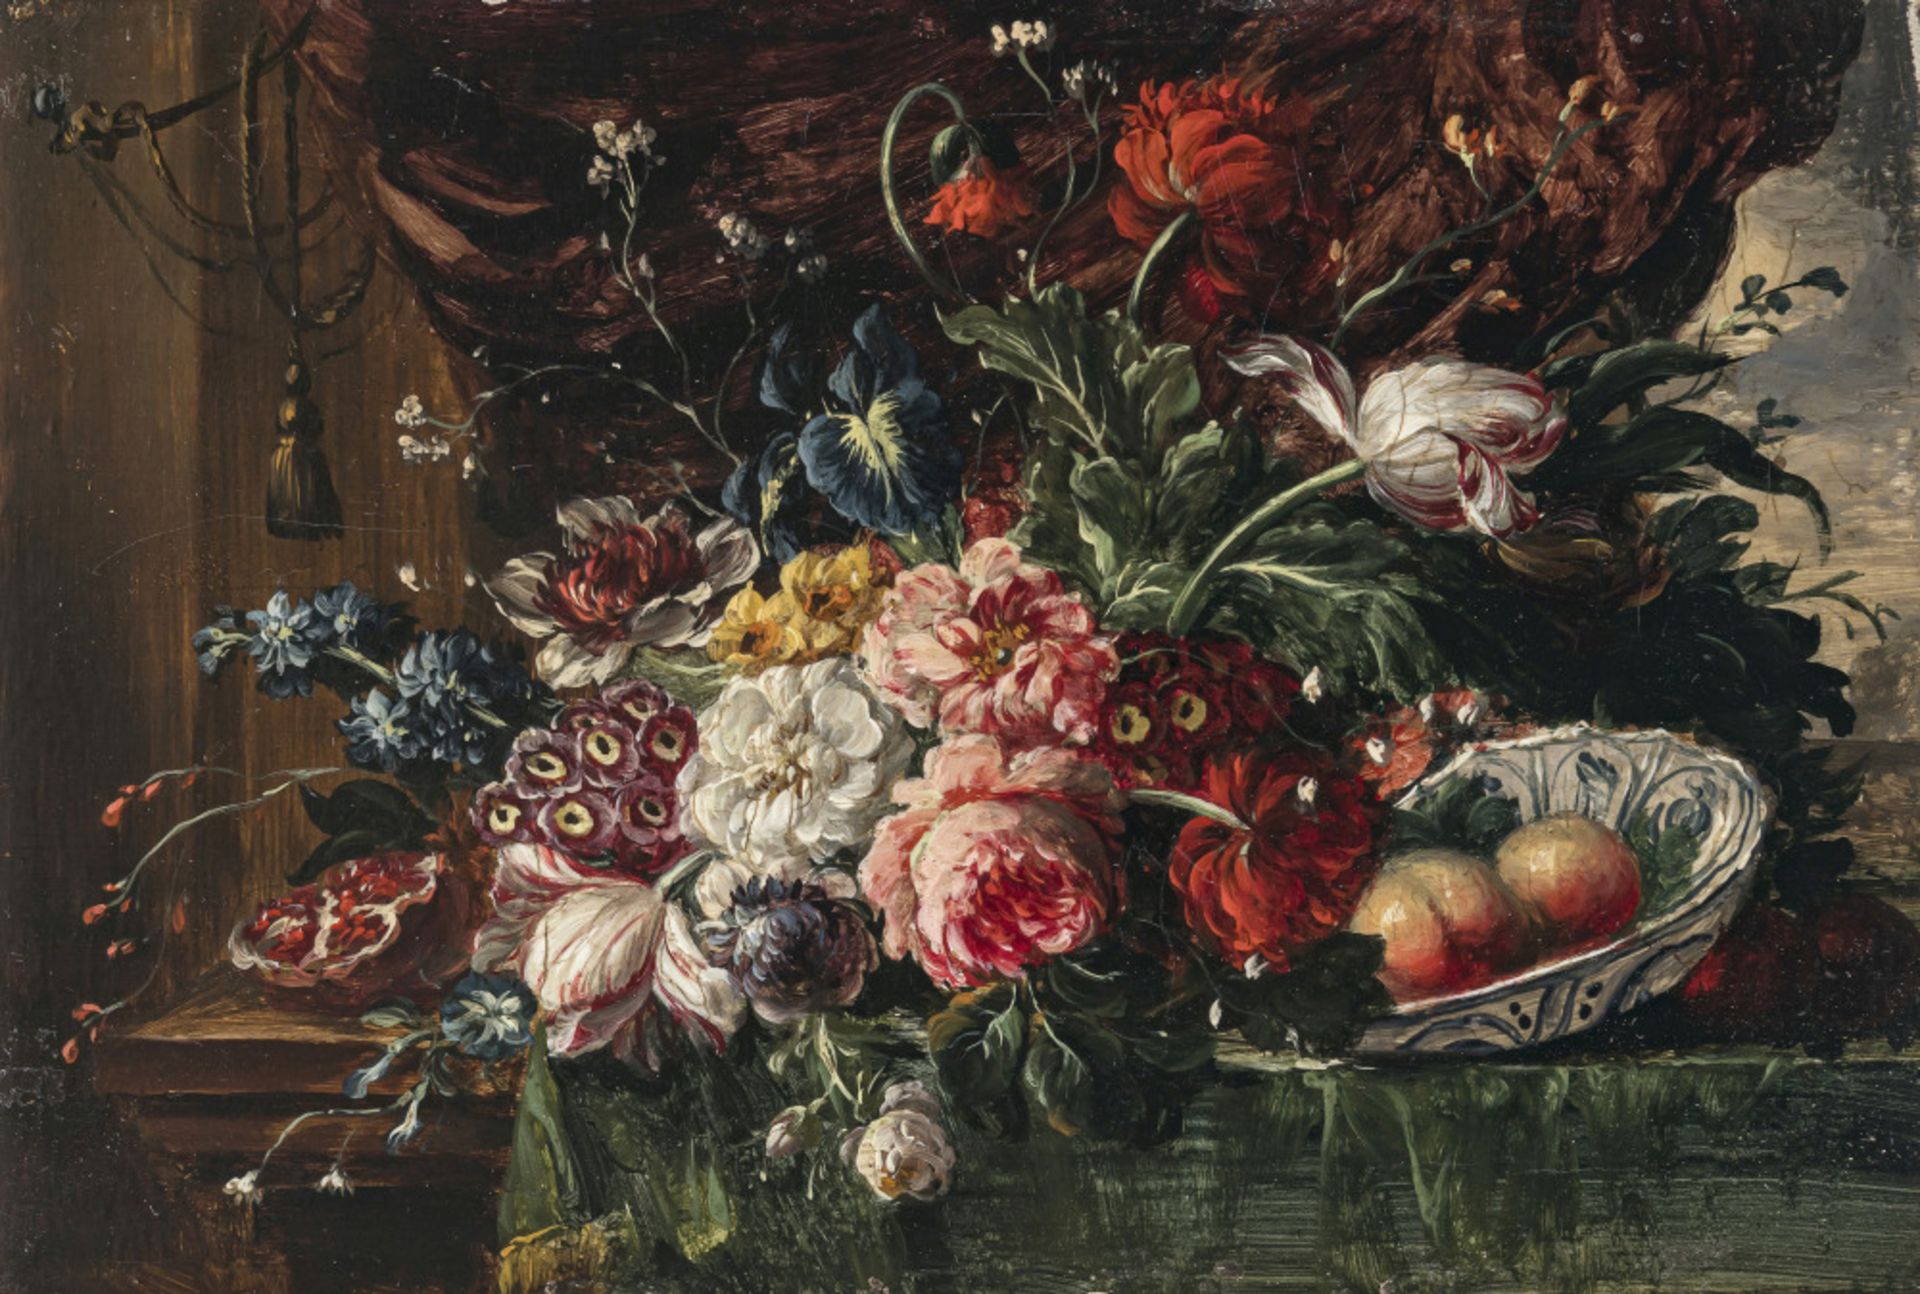 Unbekannt 19th century - Still life with flowers and fruit